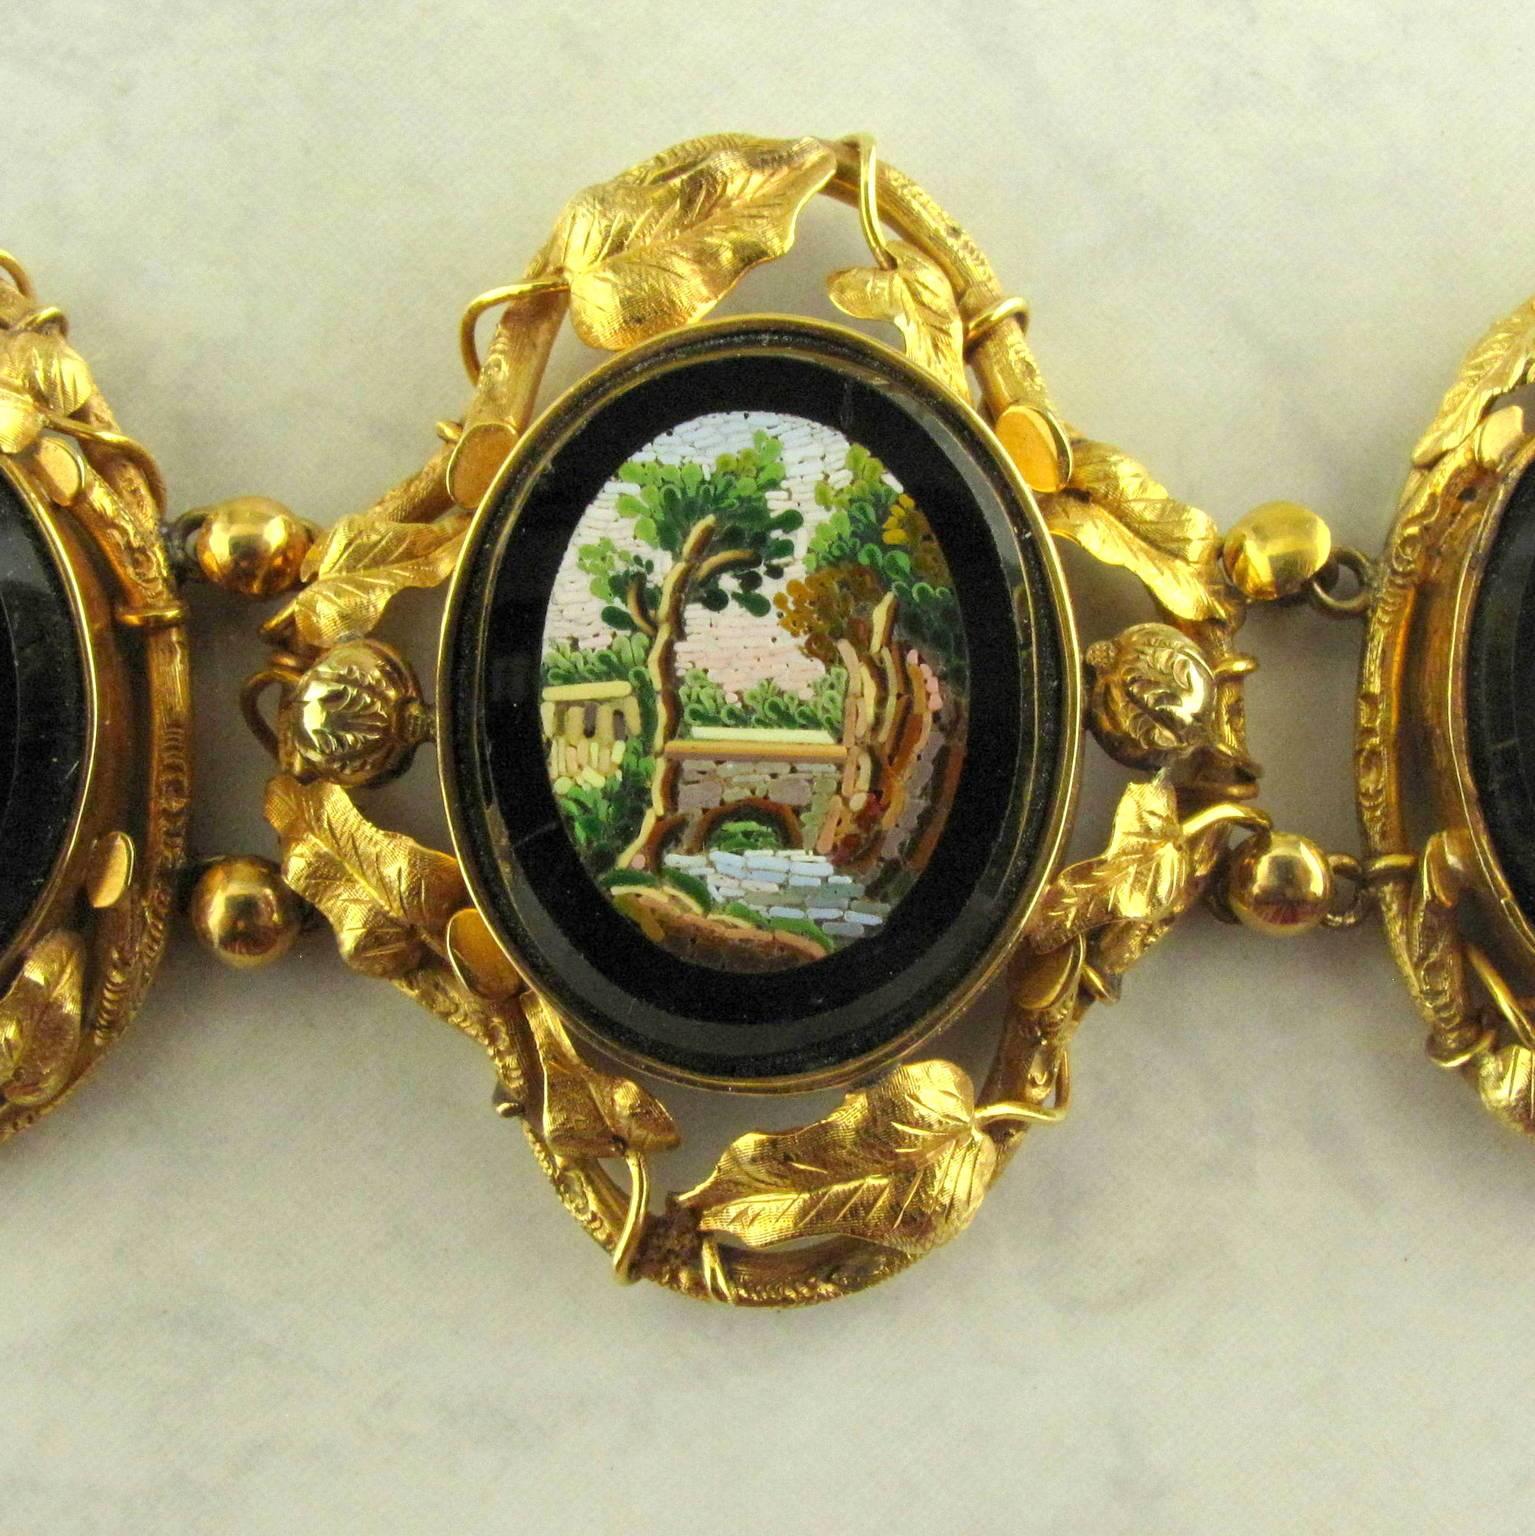 14 karat yellow gold Victorian micro mosaic bracelet.
The antique bracelet consisting of five linked sections of onyx with micro mosaic shields in trailing leaf motif  frames depicting water scenes.  Measuring  1.50 at its widest and tapering down